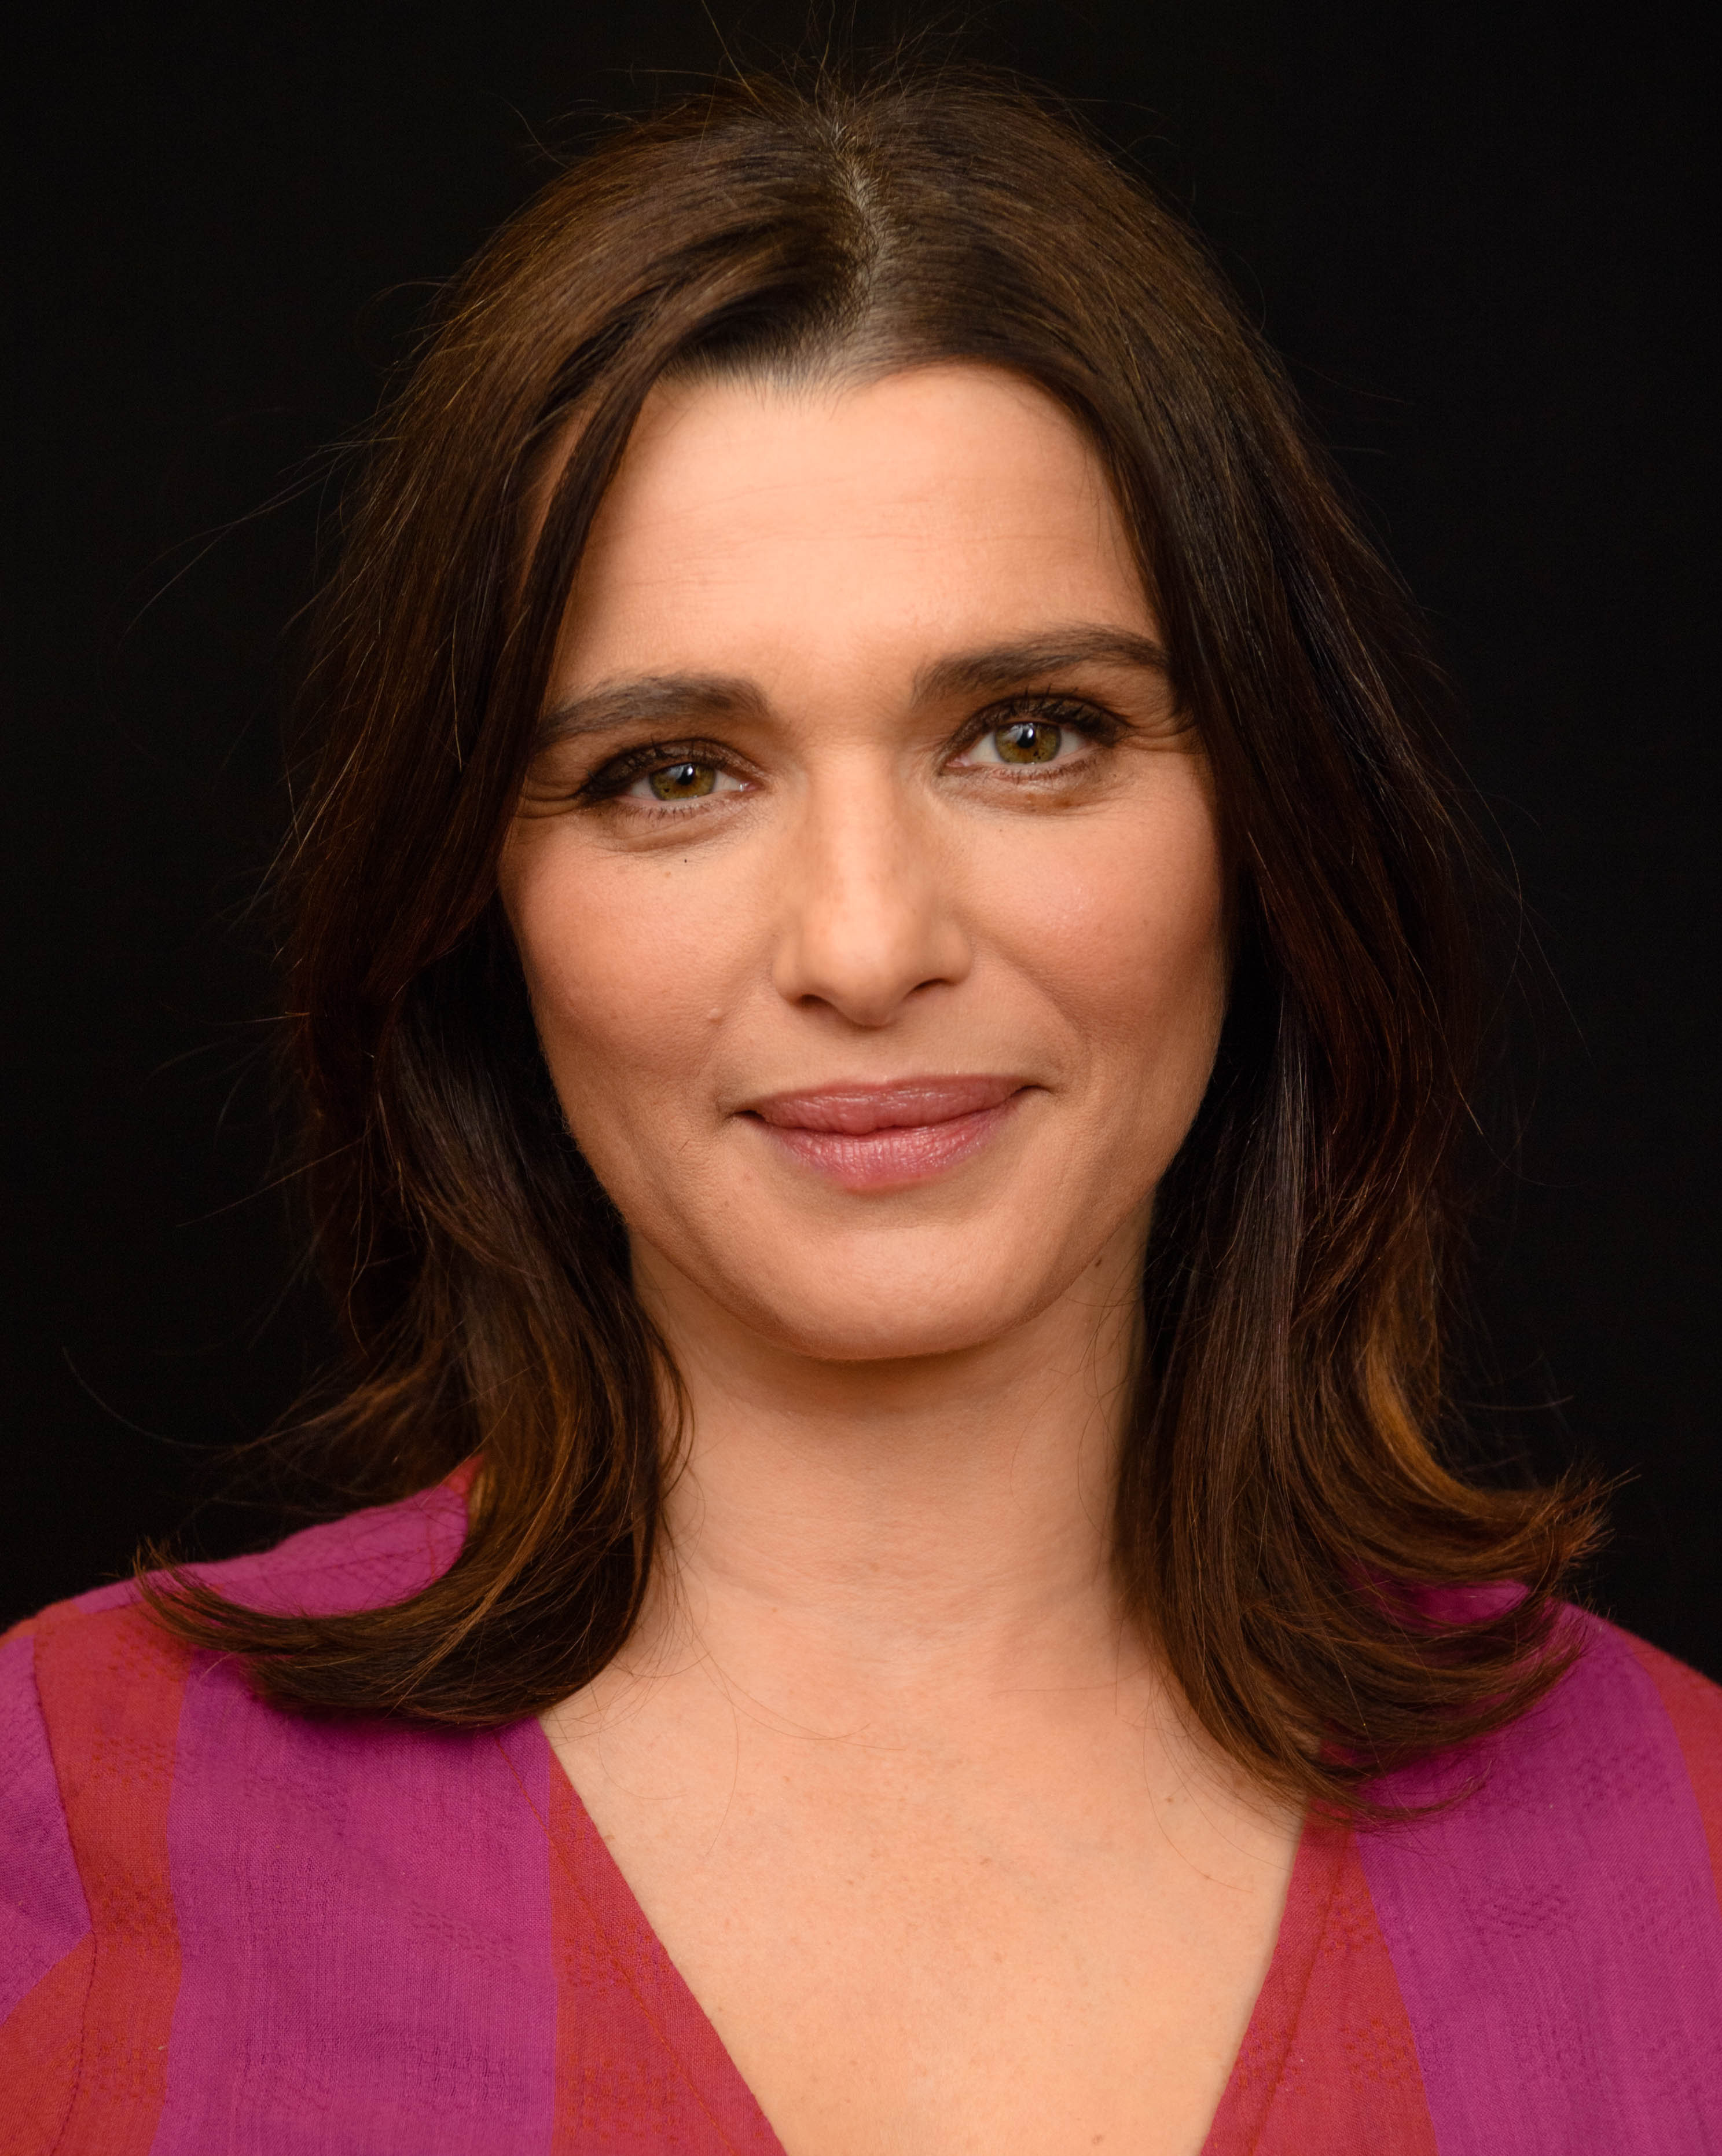 The 54-year old daughter of father George Weisz and mother  Edith Ruth Weisz Rachel Weisz in 2024 photo. Rachel Weisz earned a  million dollar salary - leaving the net worth at 30 million in 2024